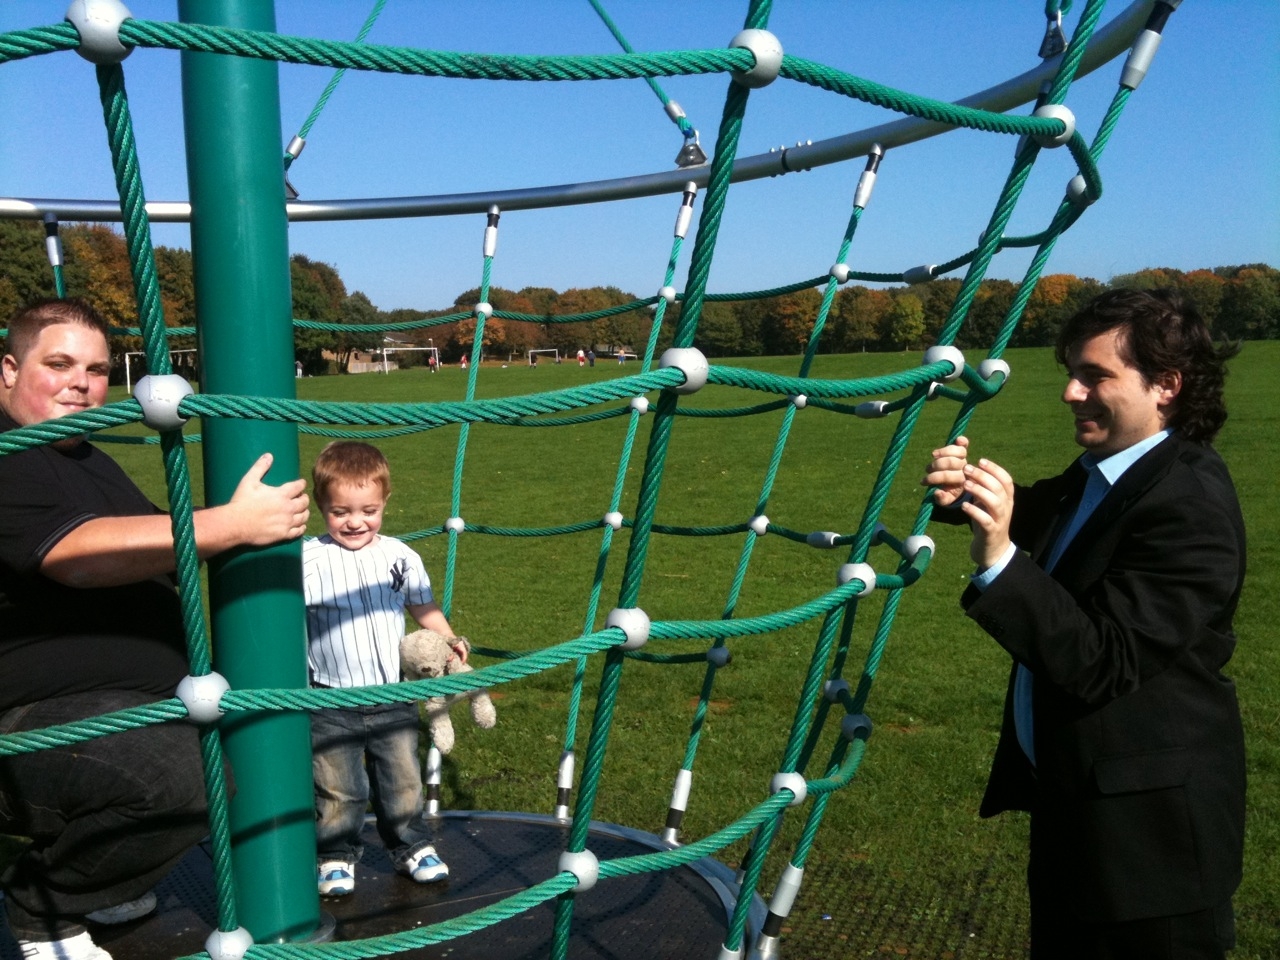 Mike & Cllr Richard Giddings on the new play equipment with  Mike son (Jamie, Age 2)